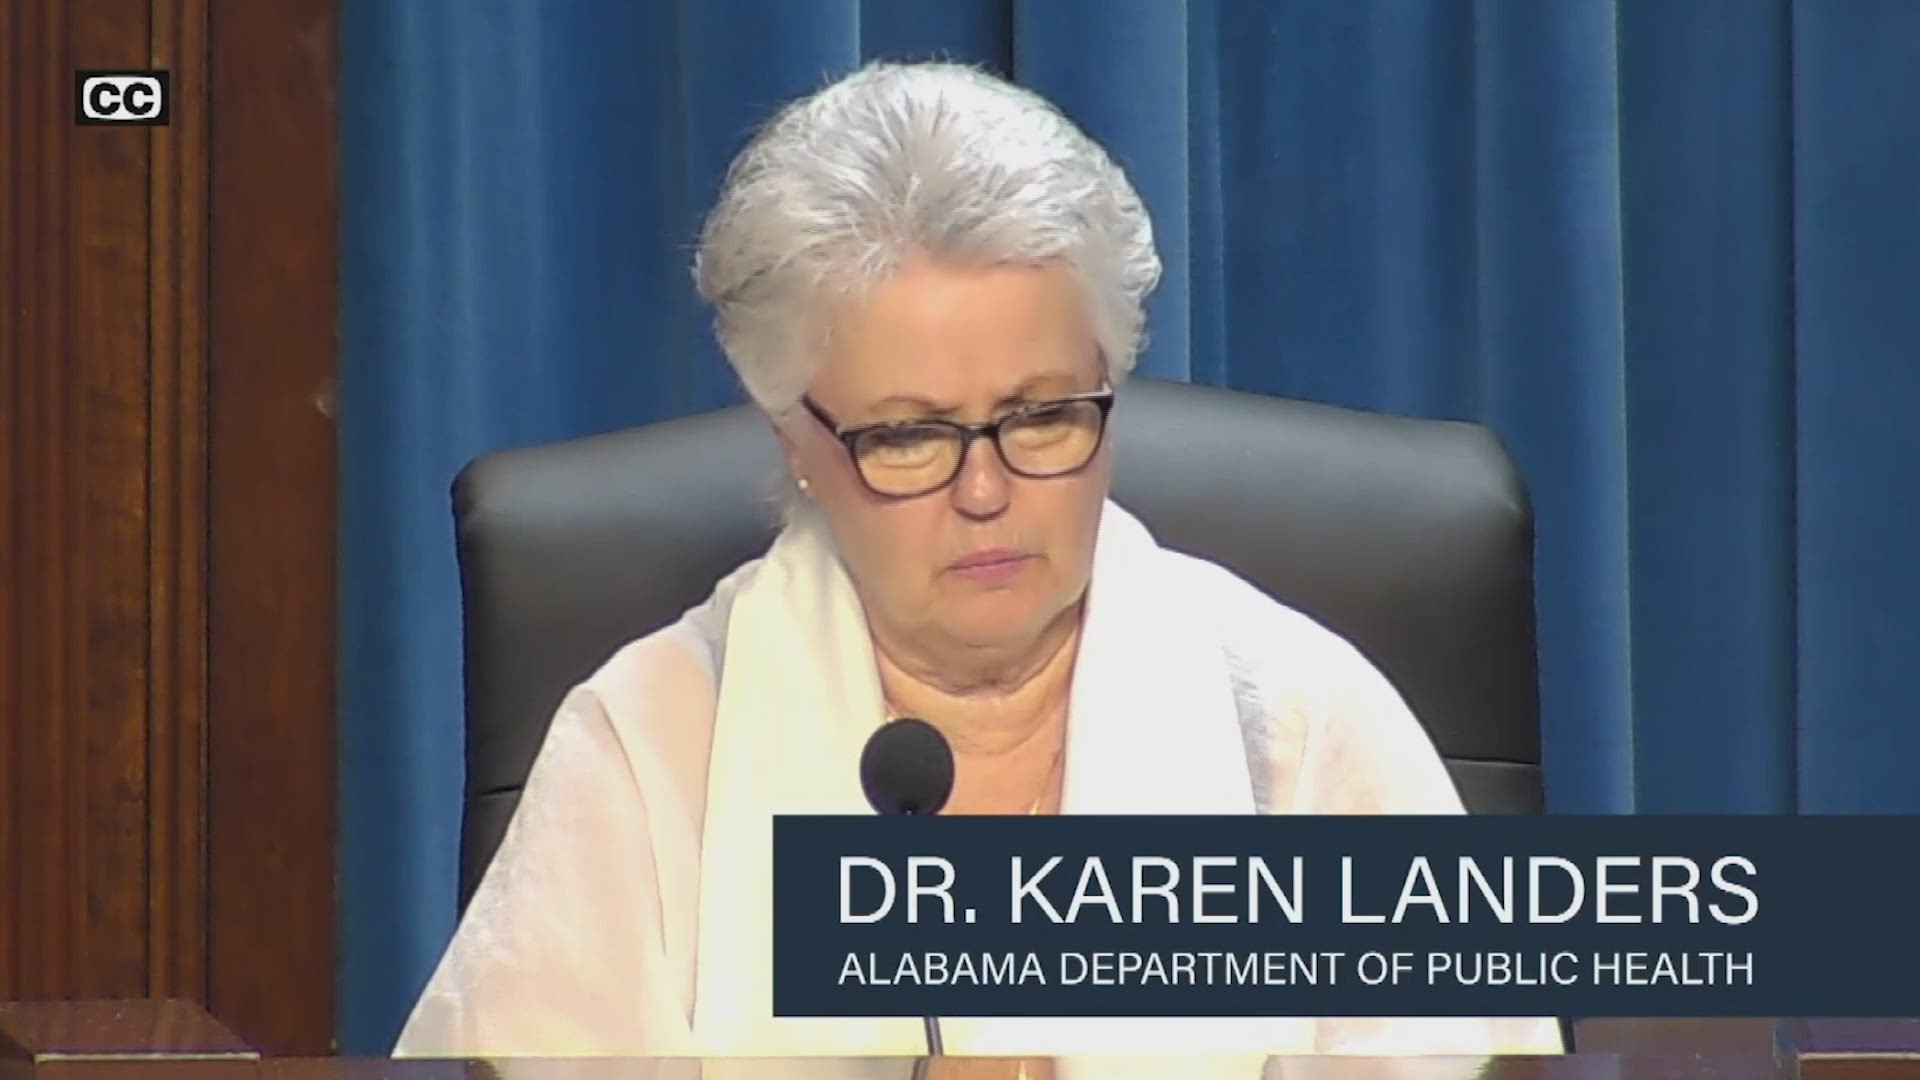 Dr. Karen Landers with the ADPH says people trying to get virus should stop.